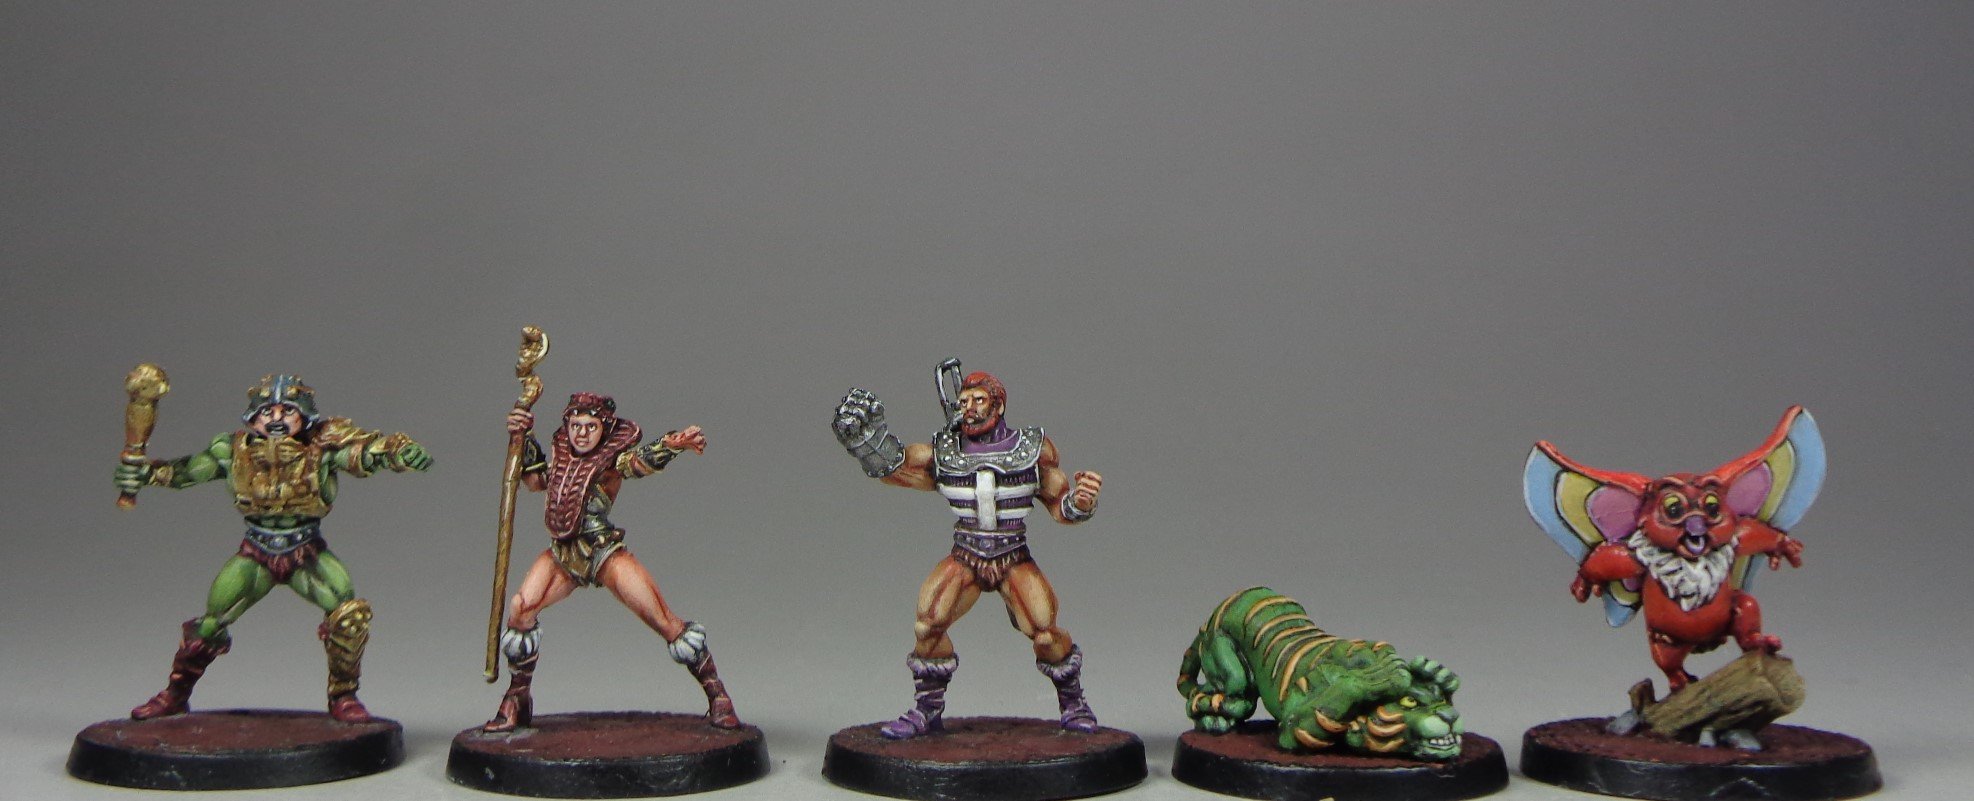 Masters of the Universe Clash for Eternia Paintedfigs Miniature Painting Service (26).jpg